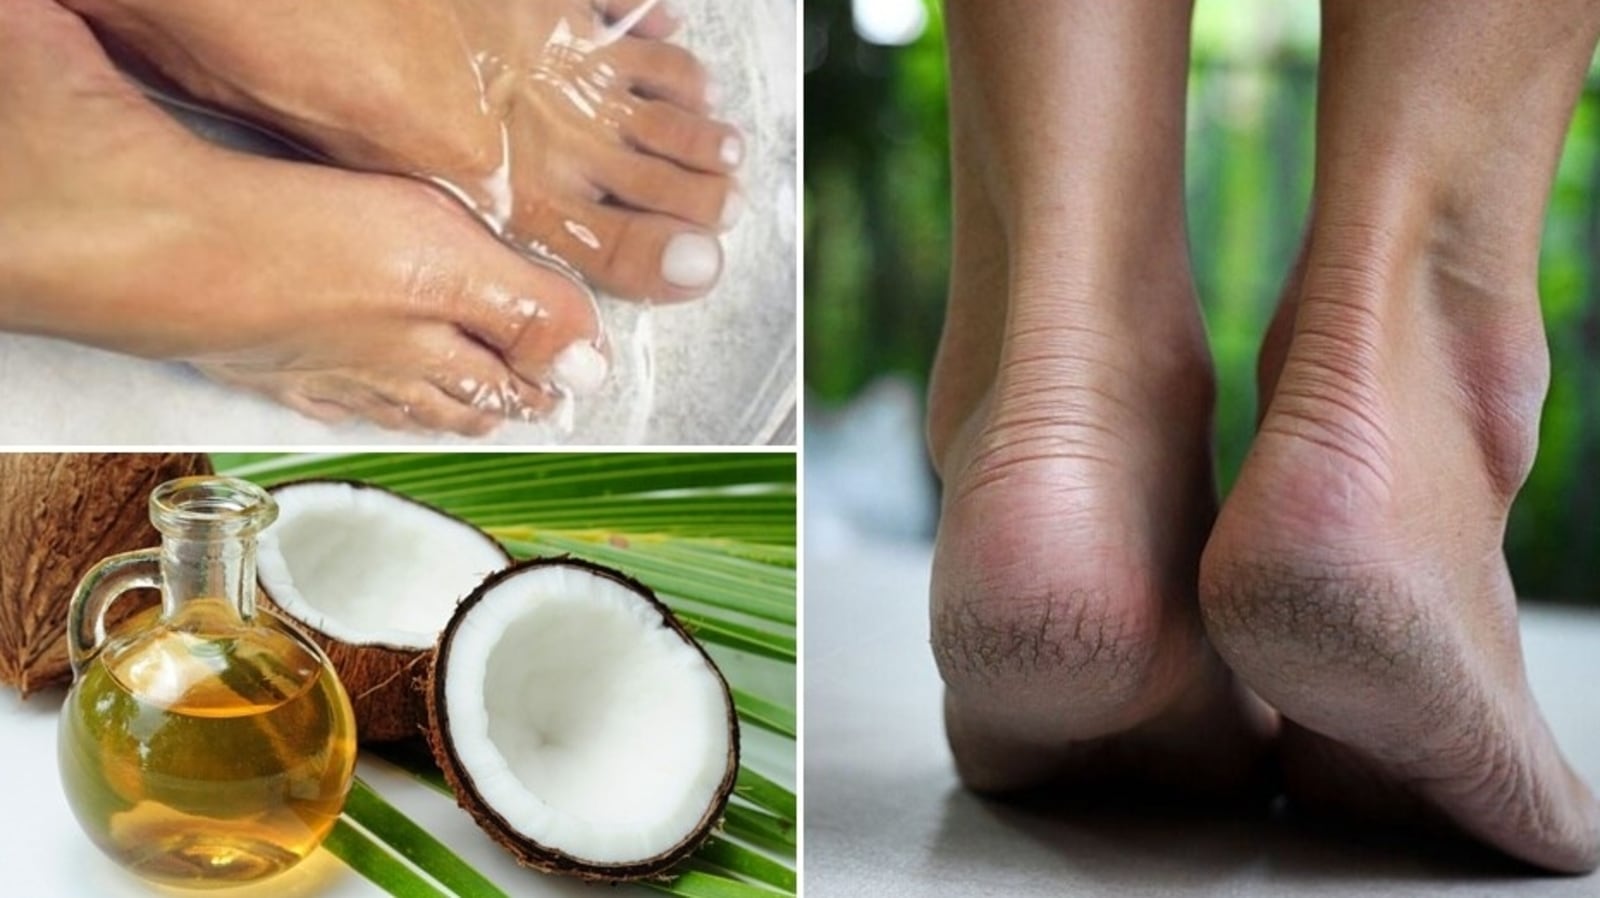 DIY Foot Mask to Get Rid of Cracked Heels | Upstyle